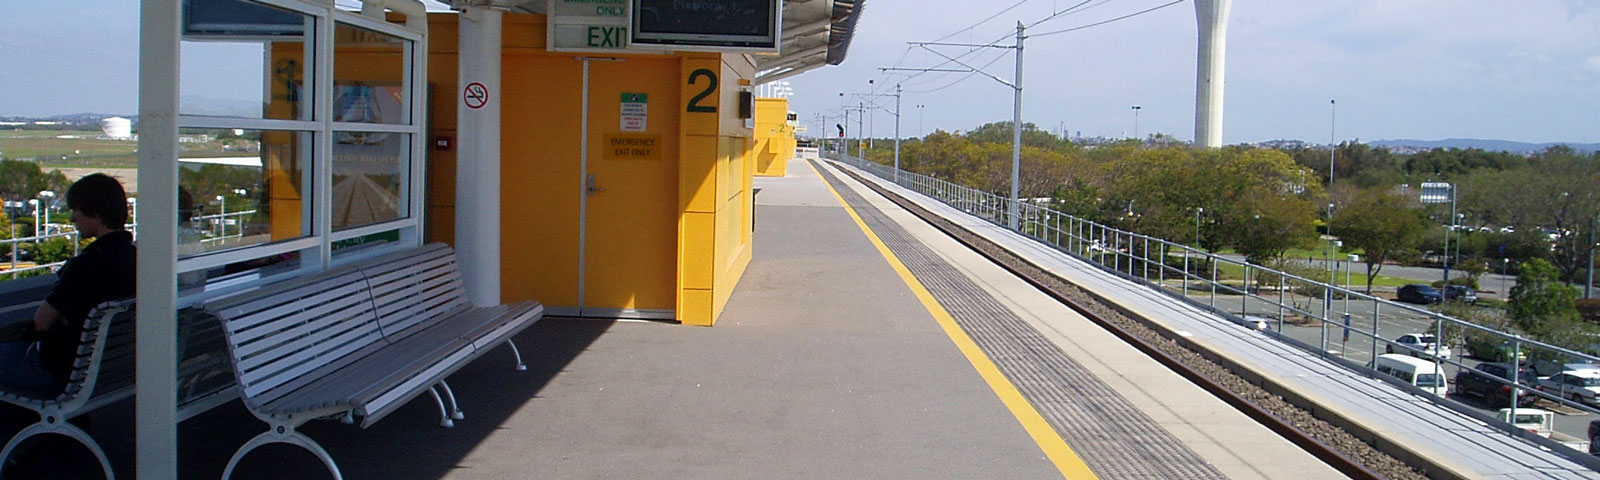 Train Station and Public Anti-Slip and Safety Floors